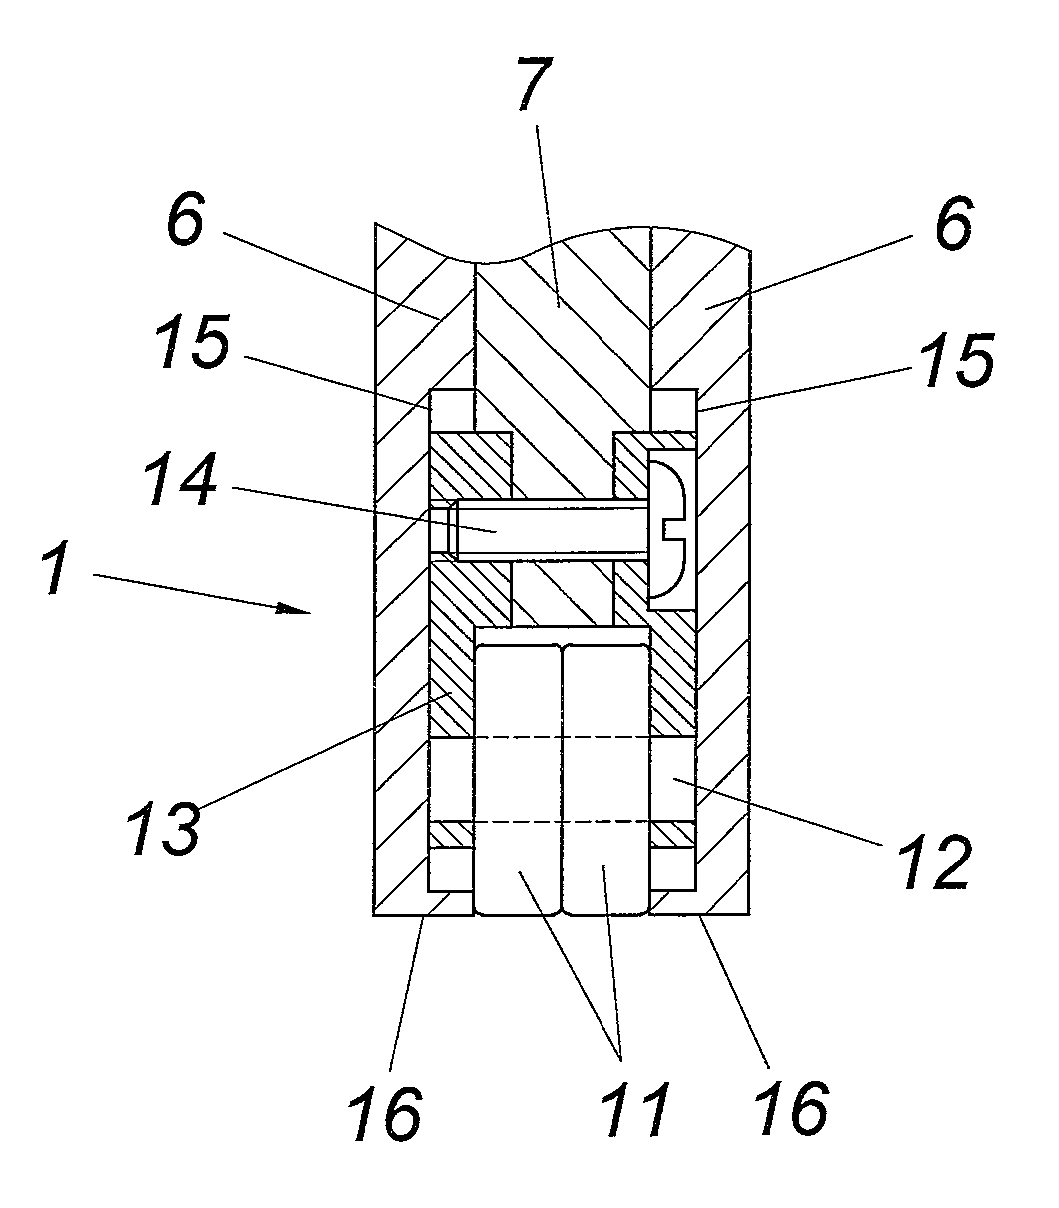 Apparatus for laying fiber tapes